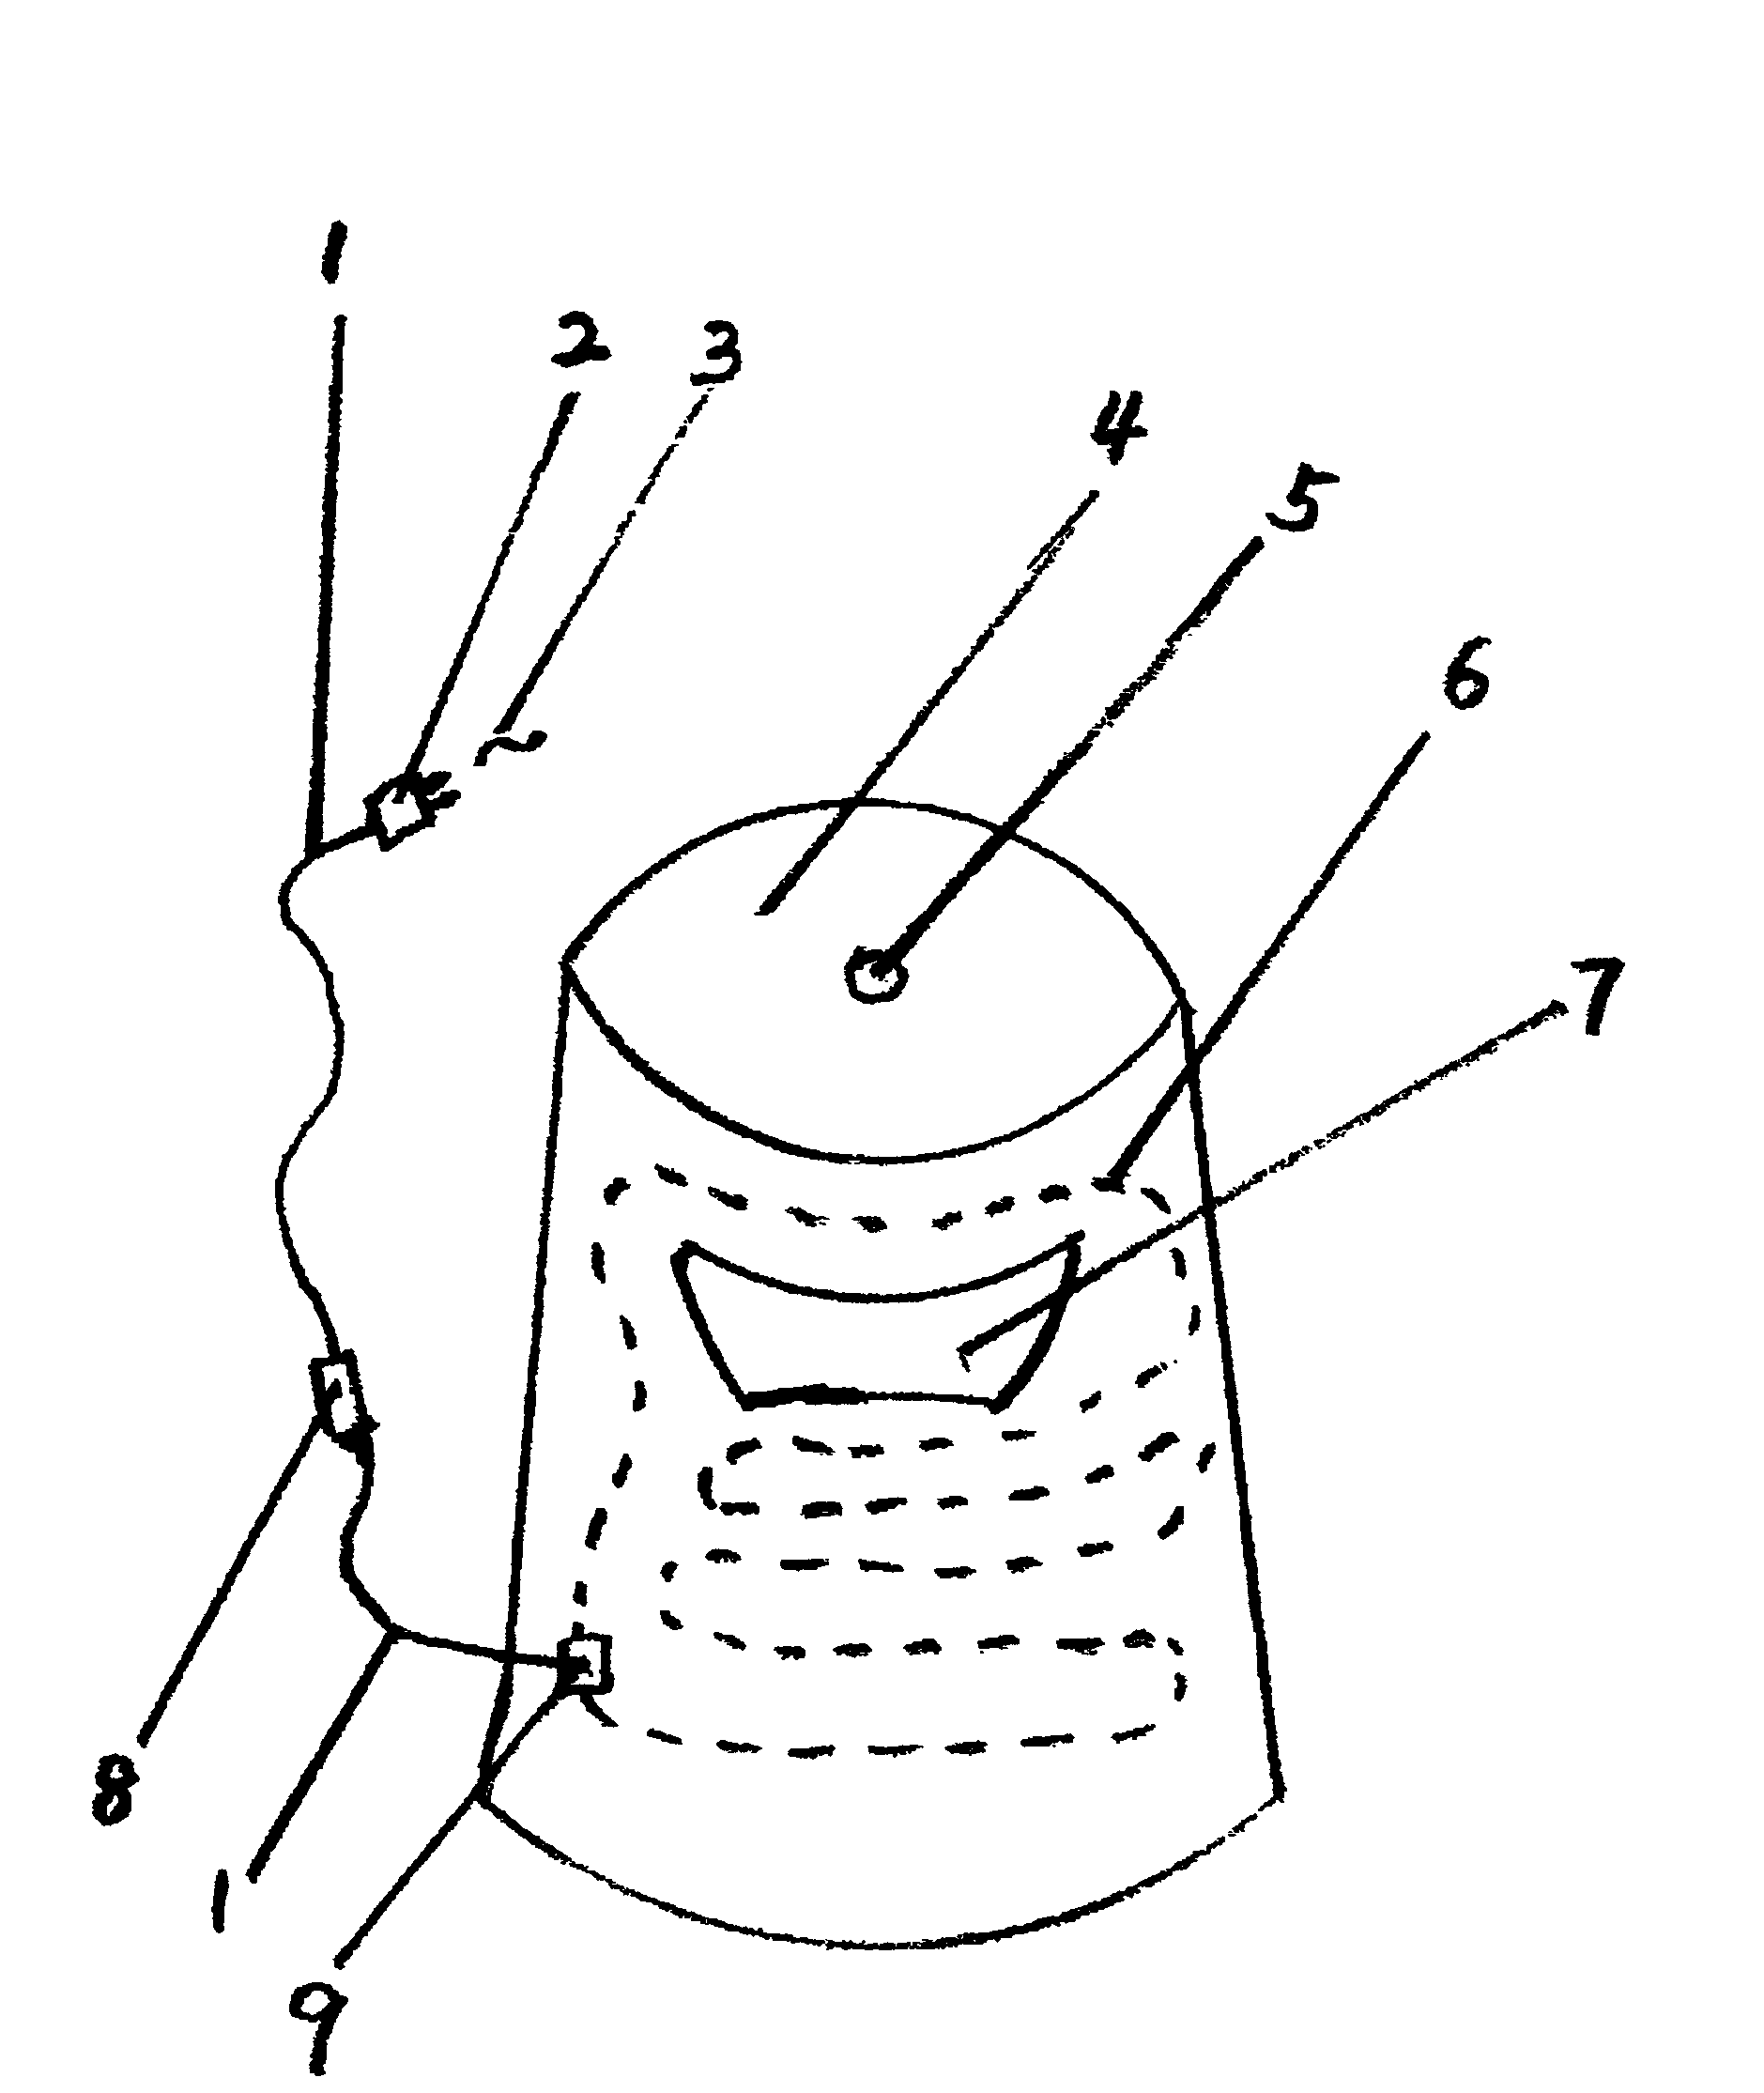 Method for expanding head and respiratory vessels through electrothermal air so as to treat diseases and thermal helmet